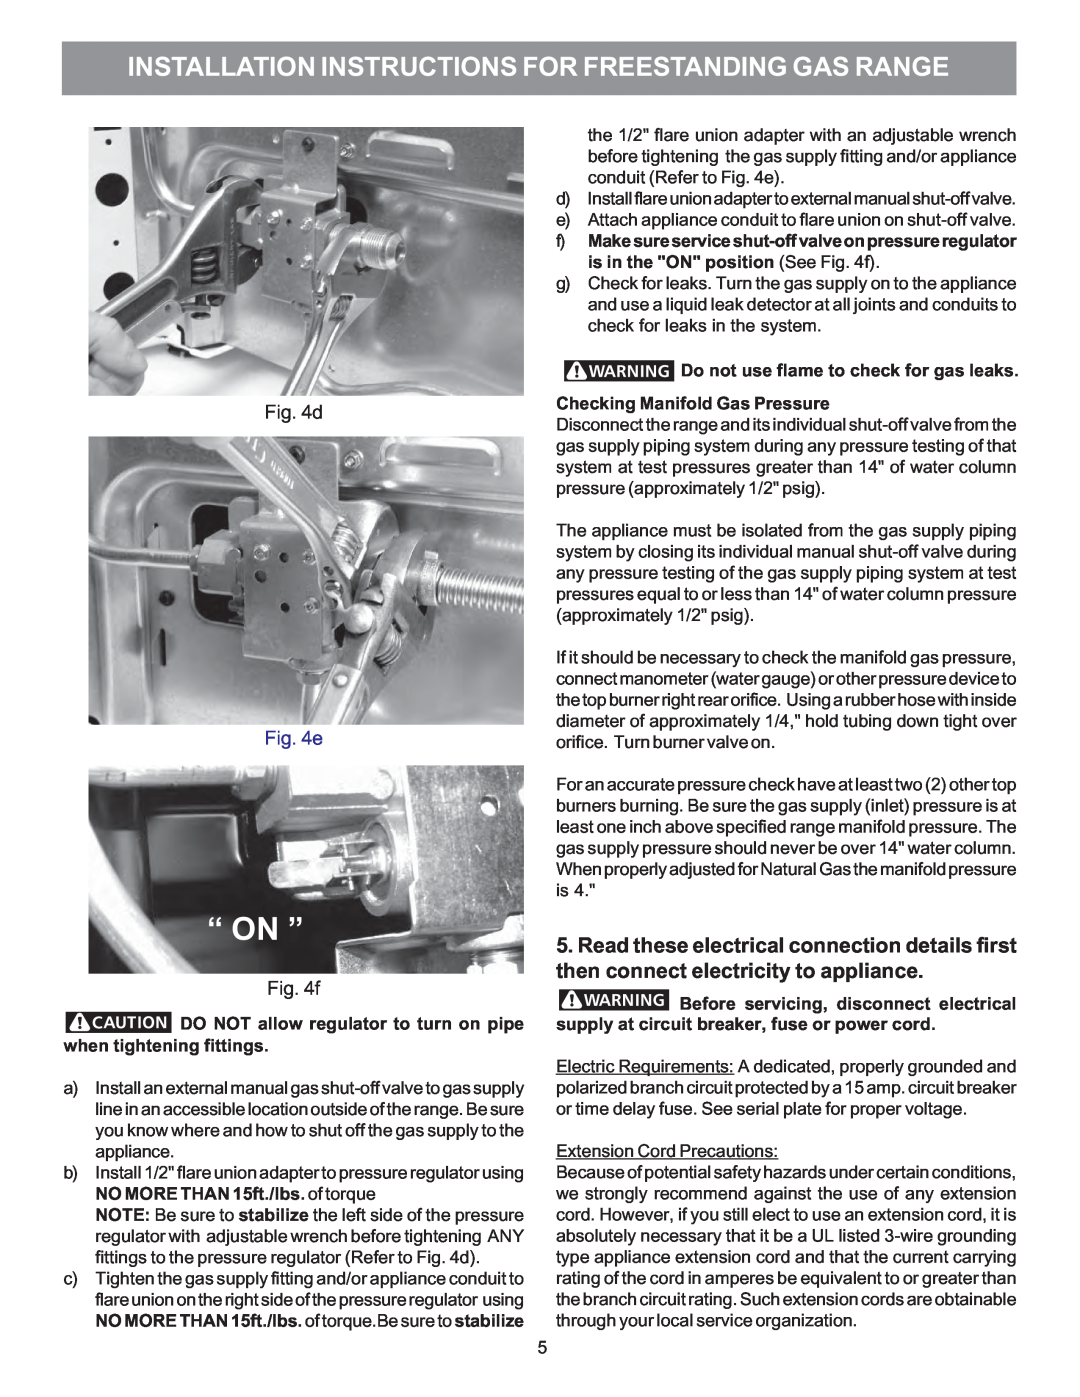 Electrolux 316469104 installation instructions “ On ”, f, Installation Instructions For Freestanding Gas Range 